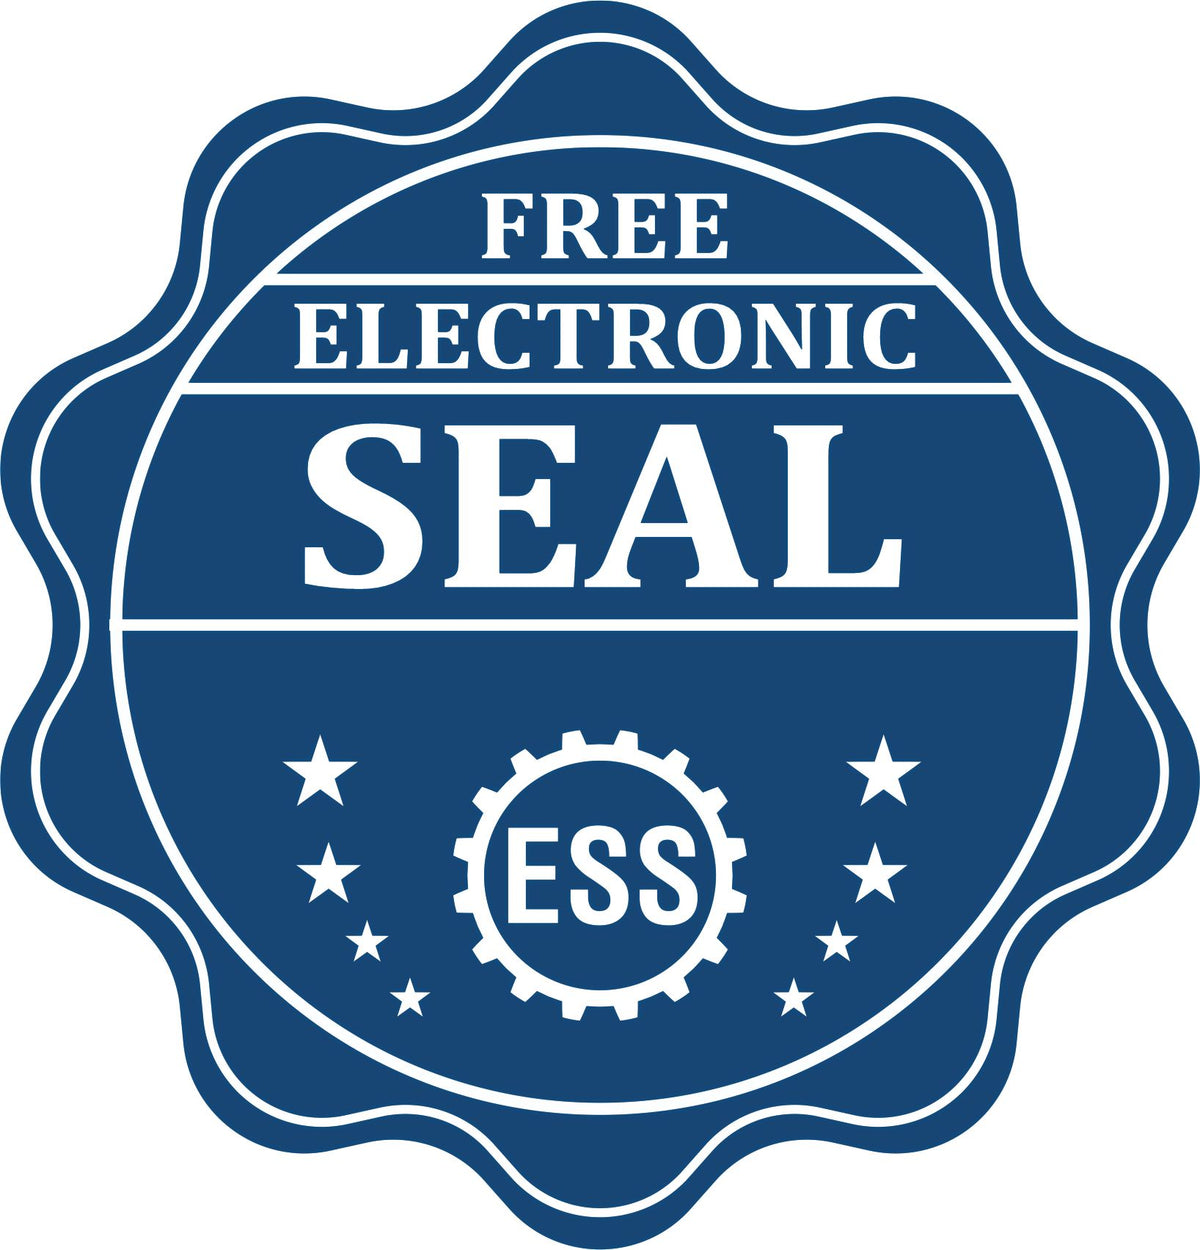 A badge showing a free electronic seal for the Super Slim Iowa Notary Public Stamp with stars and the ESS gear on the emblem.